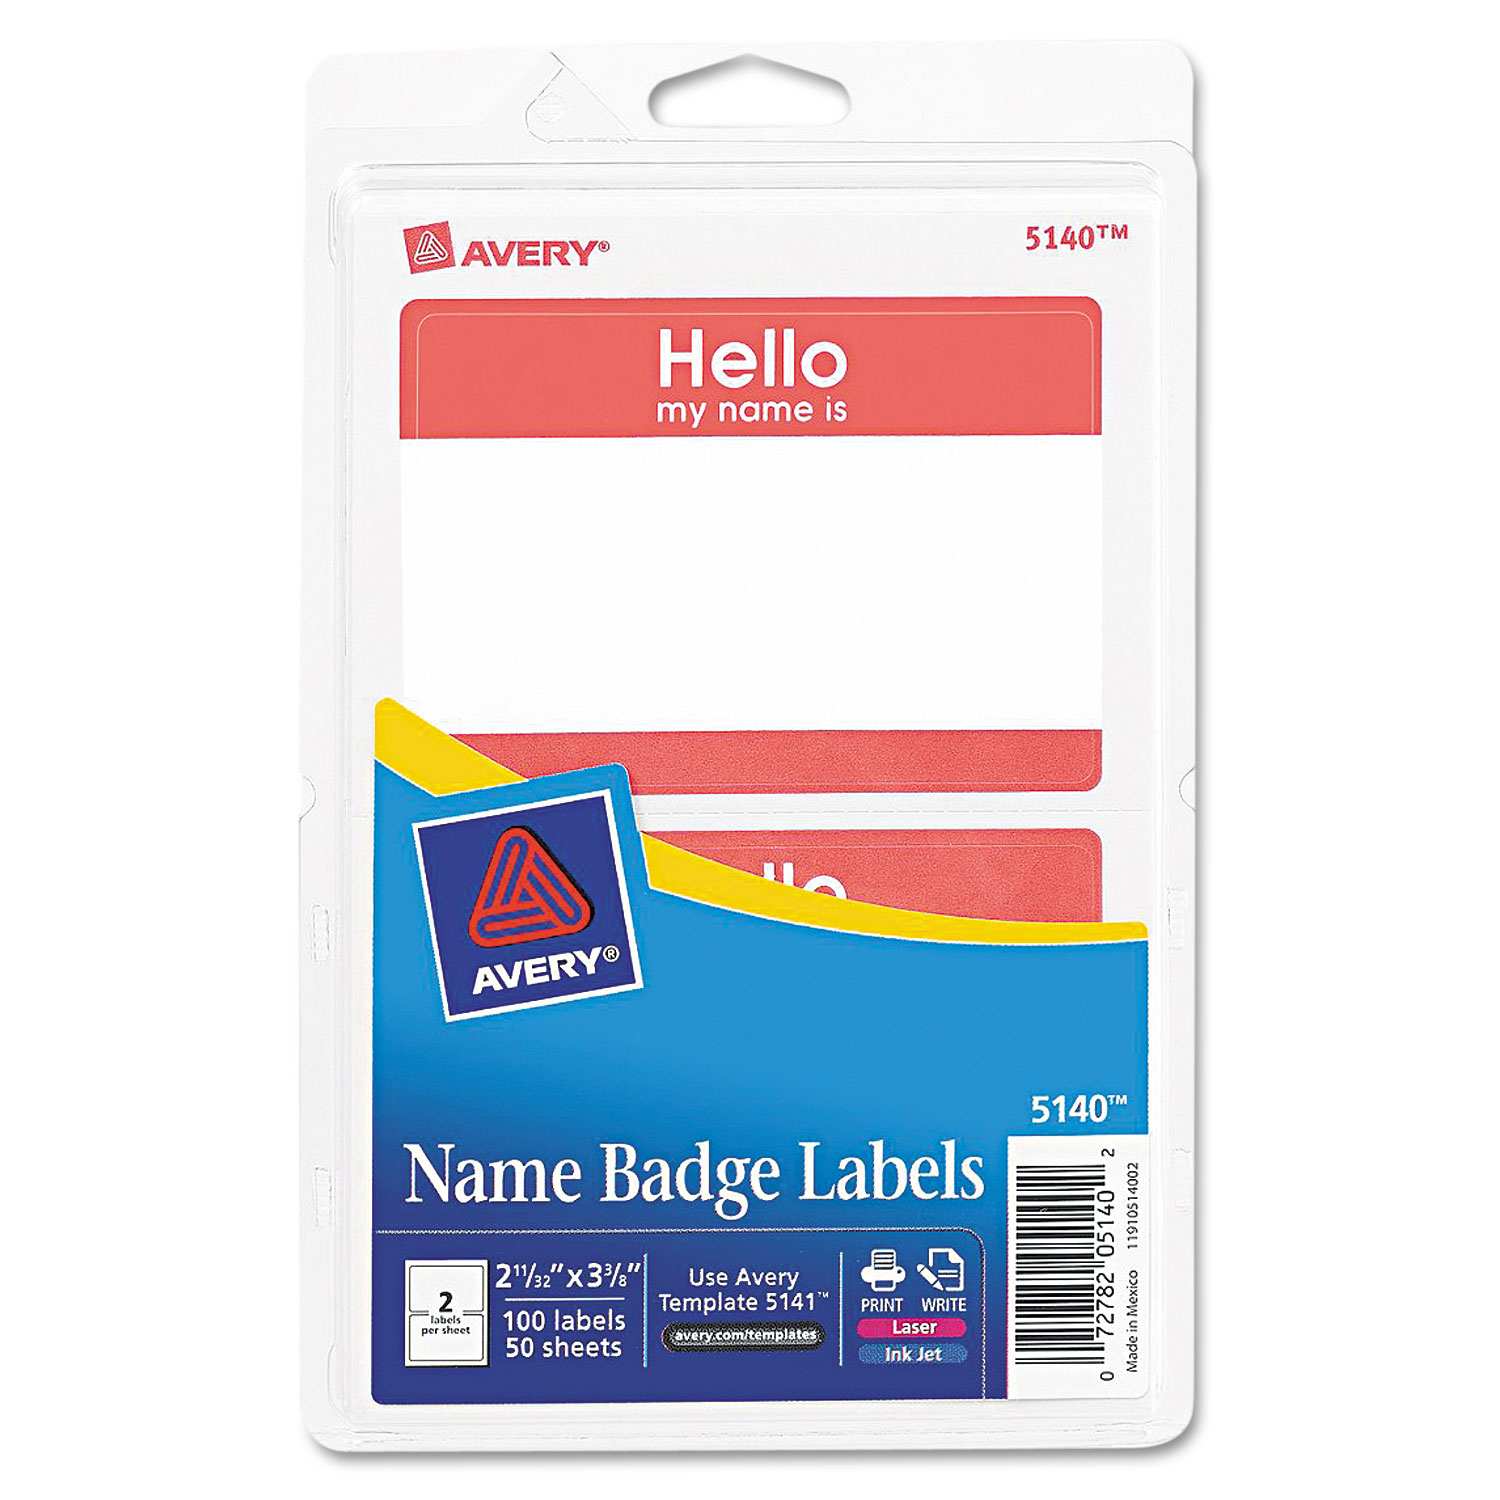  Avery 13968/5140 Printable Self-Adhesive Name Badges, 2 1/3 x 3 3/8, Red Hello, 100/Pack (AVE5140) 